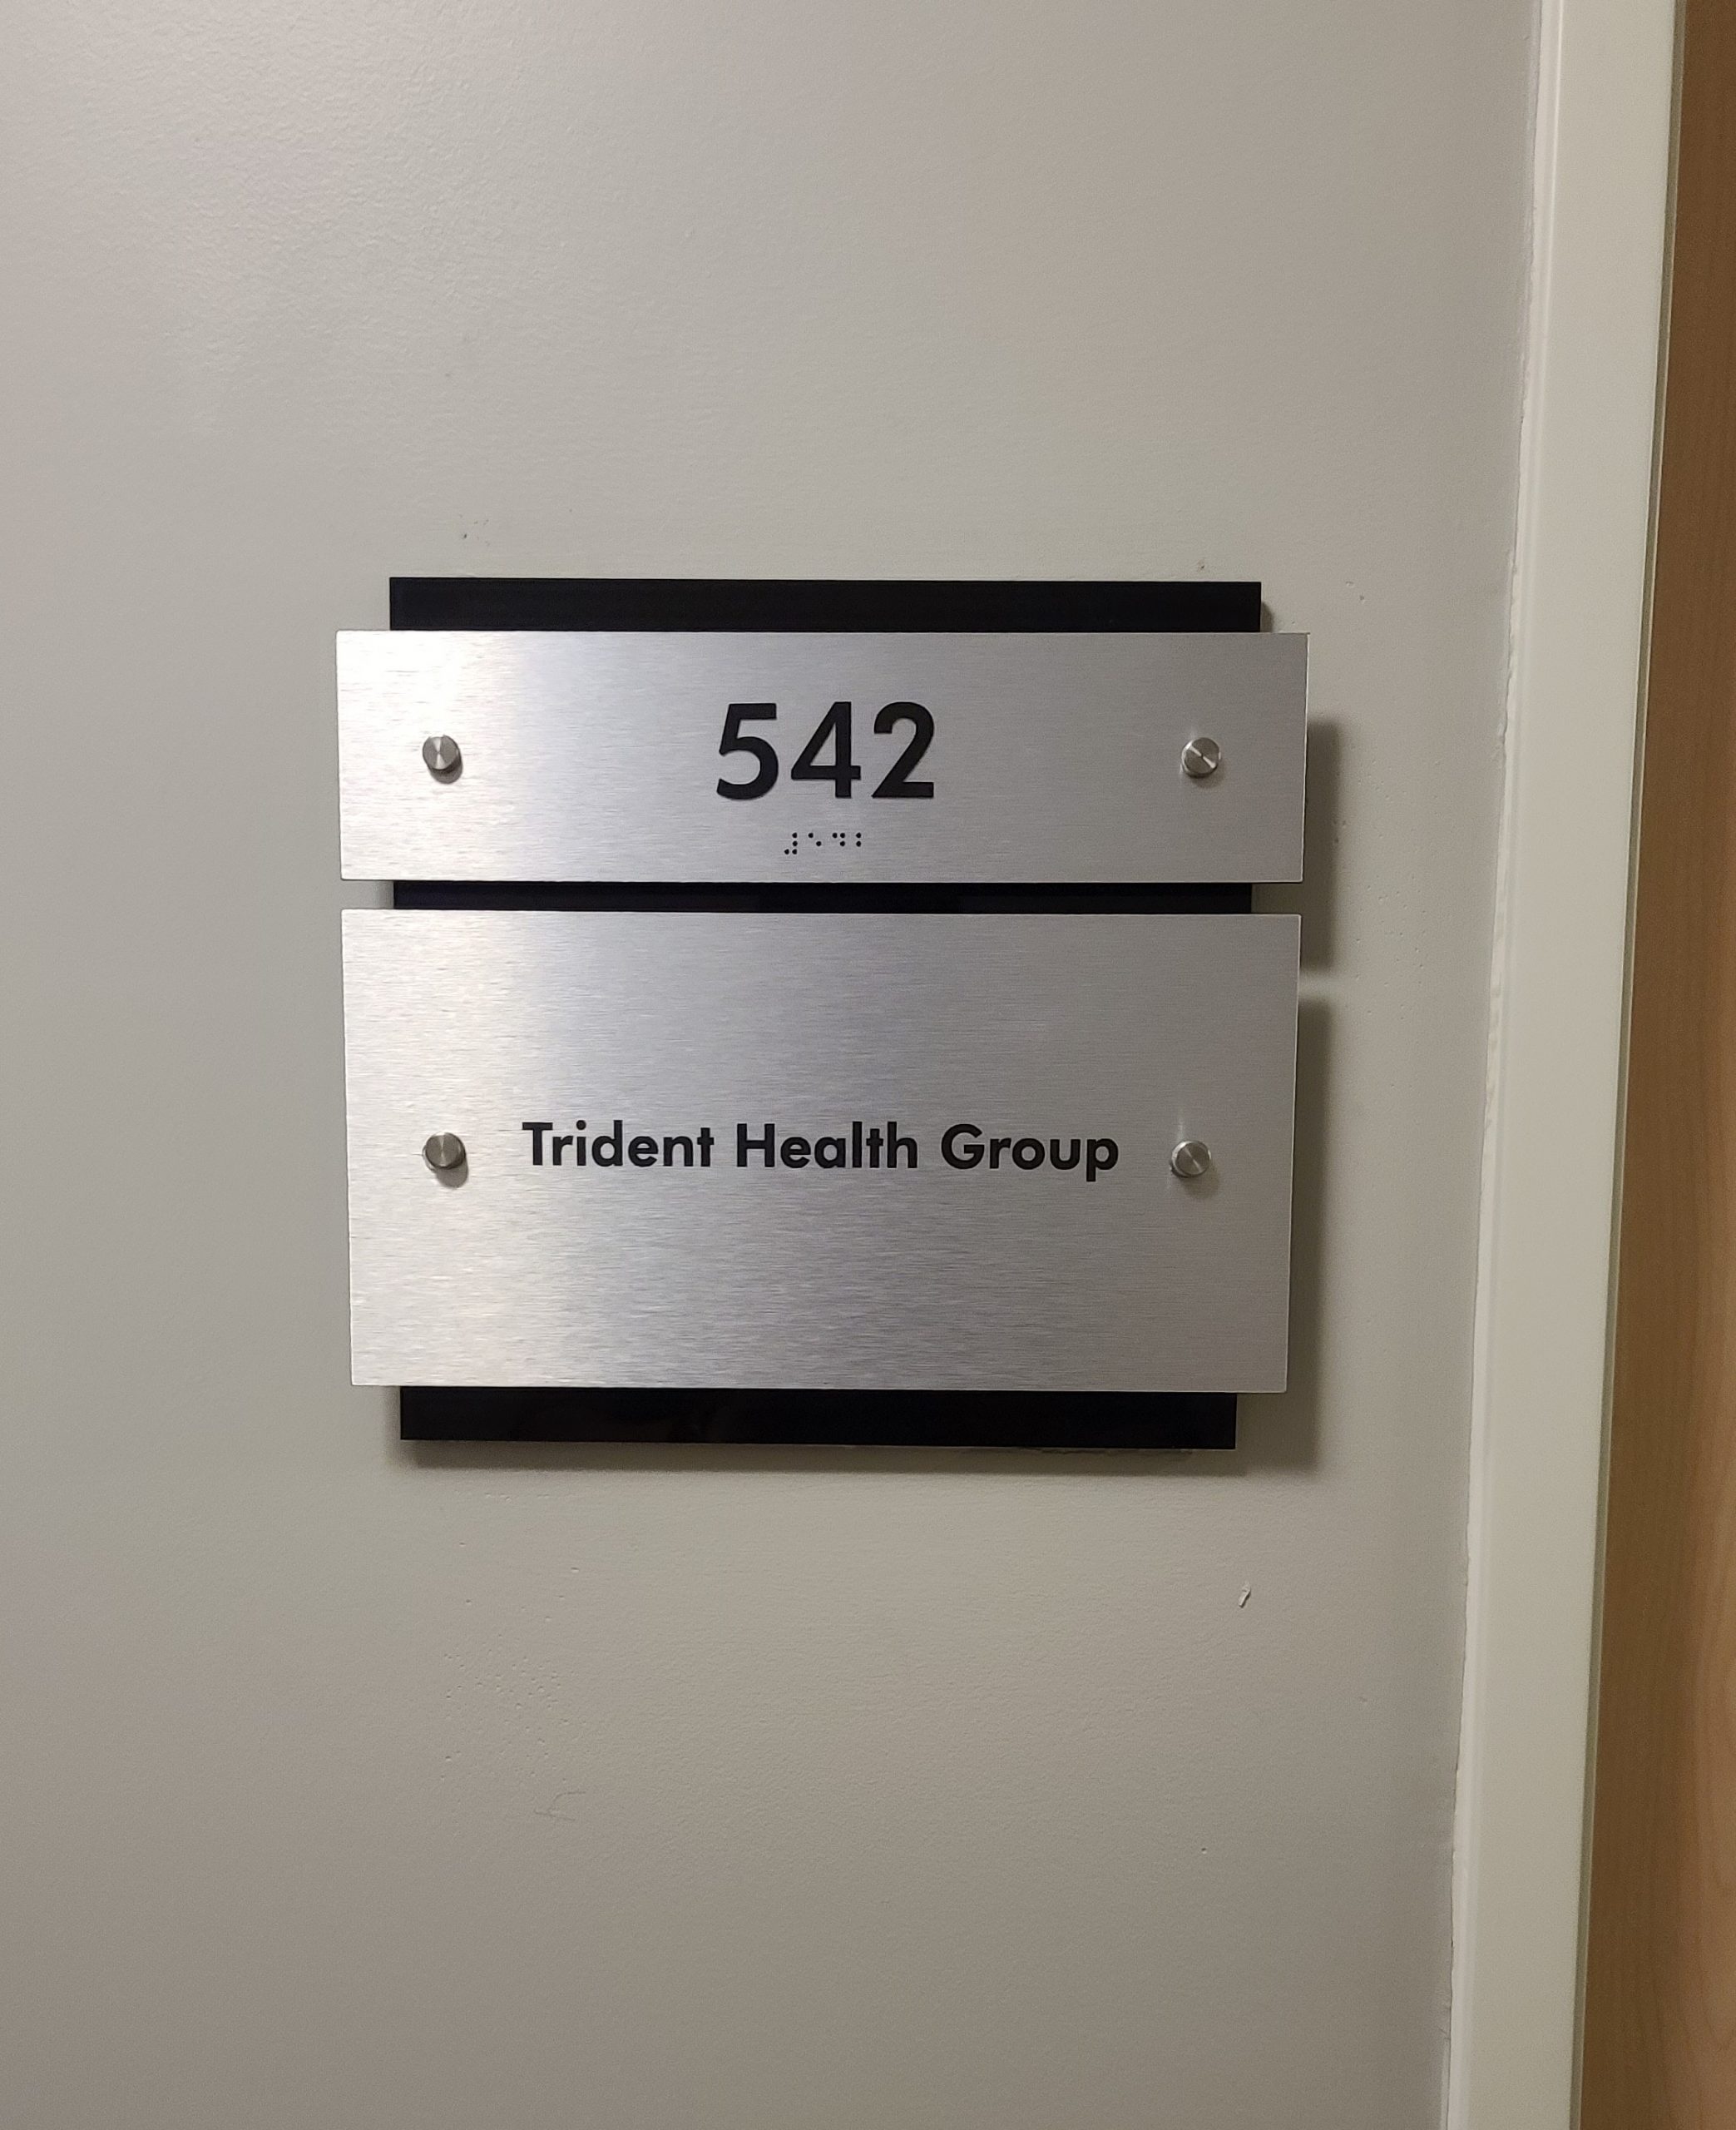 We fabricated and installed this suite door plaque for Ethan Christopher's property. It has tactile numbers and braille making it ADA-compliant.